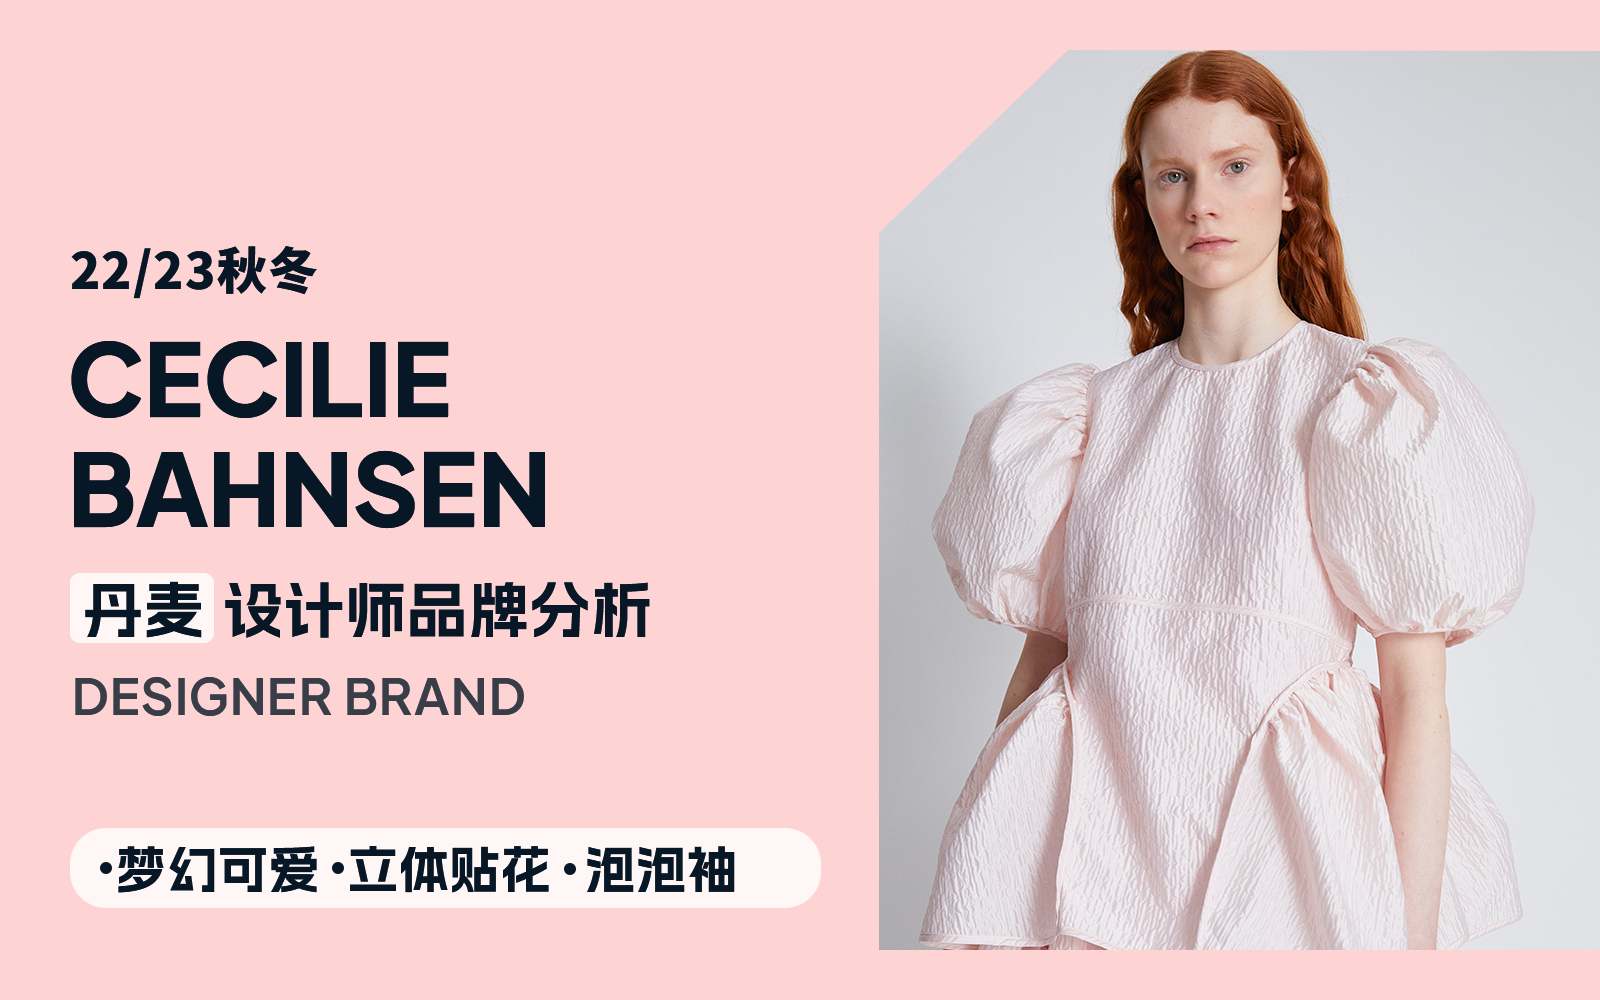 Fantastic Romance -- The Analysis of Cecilie Bahnsen The Womenswear Designer Brand